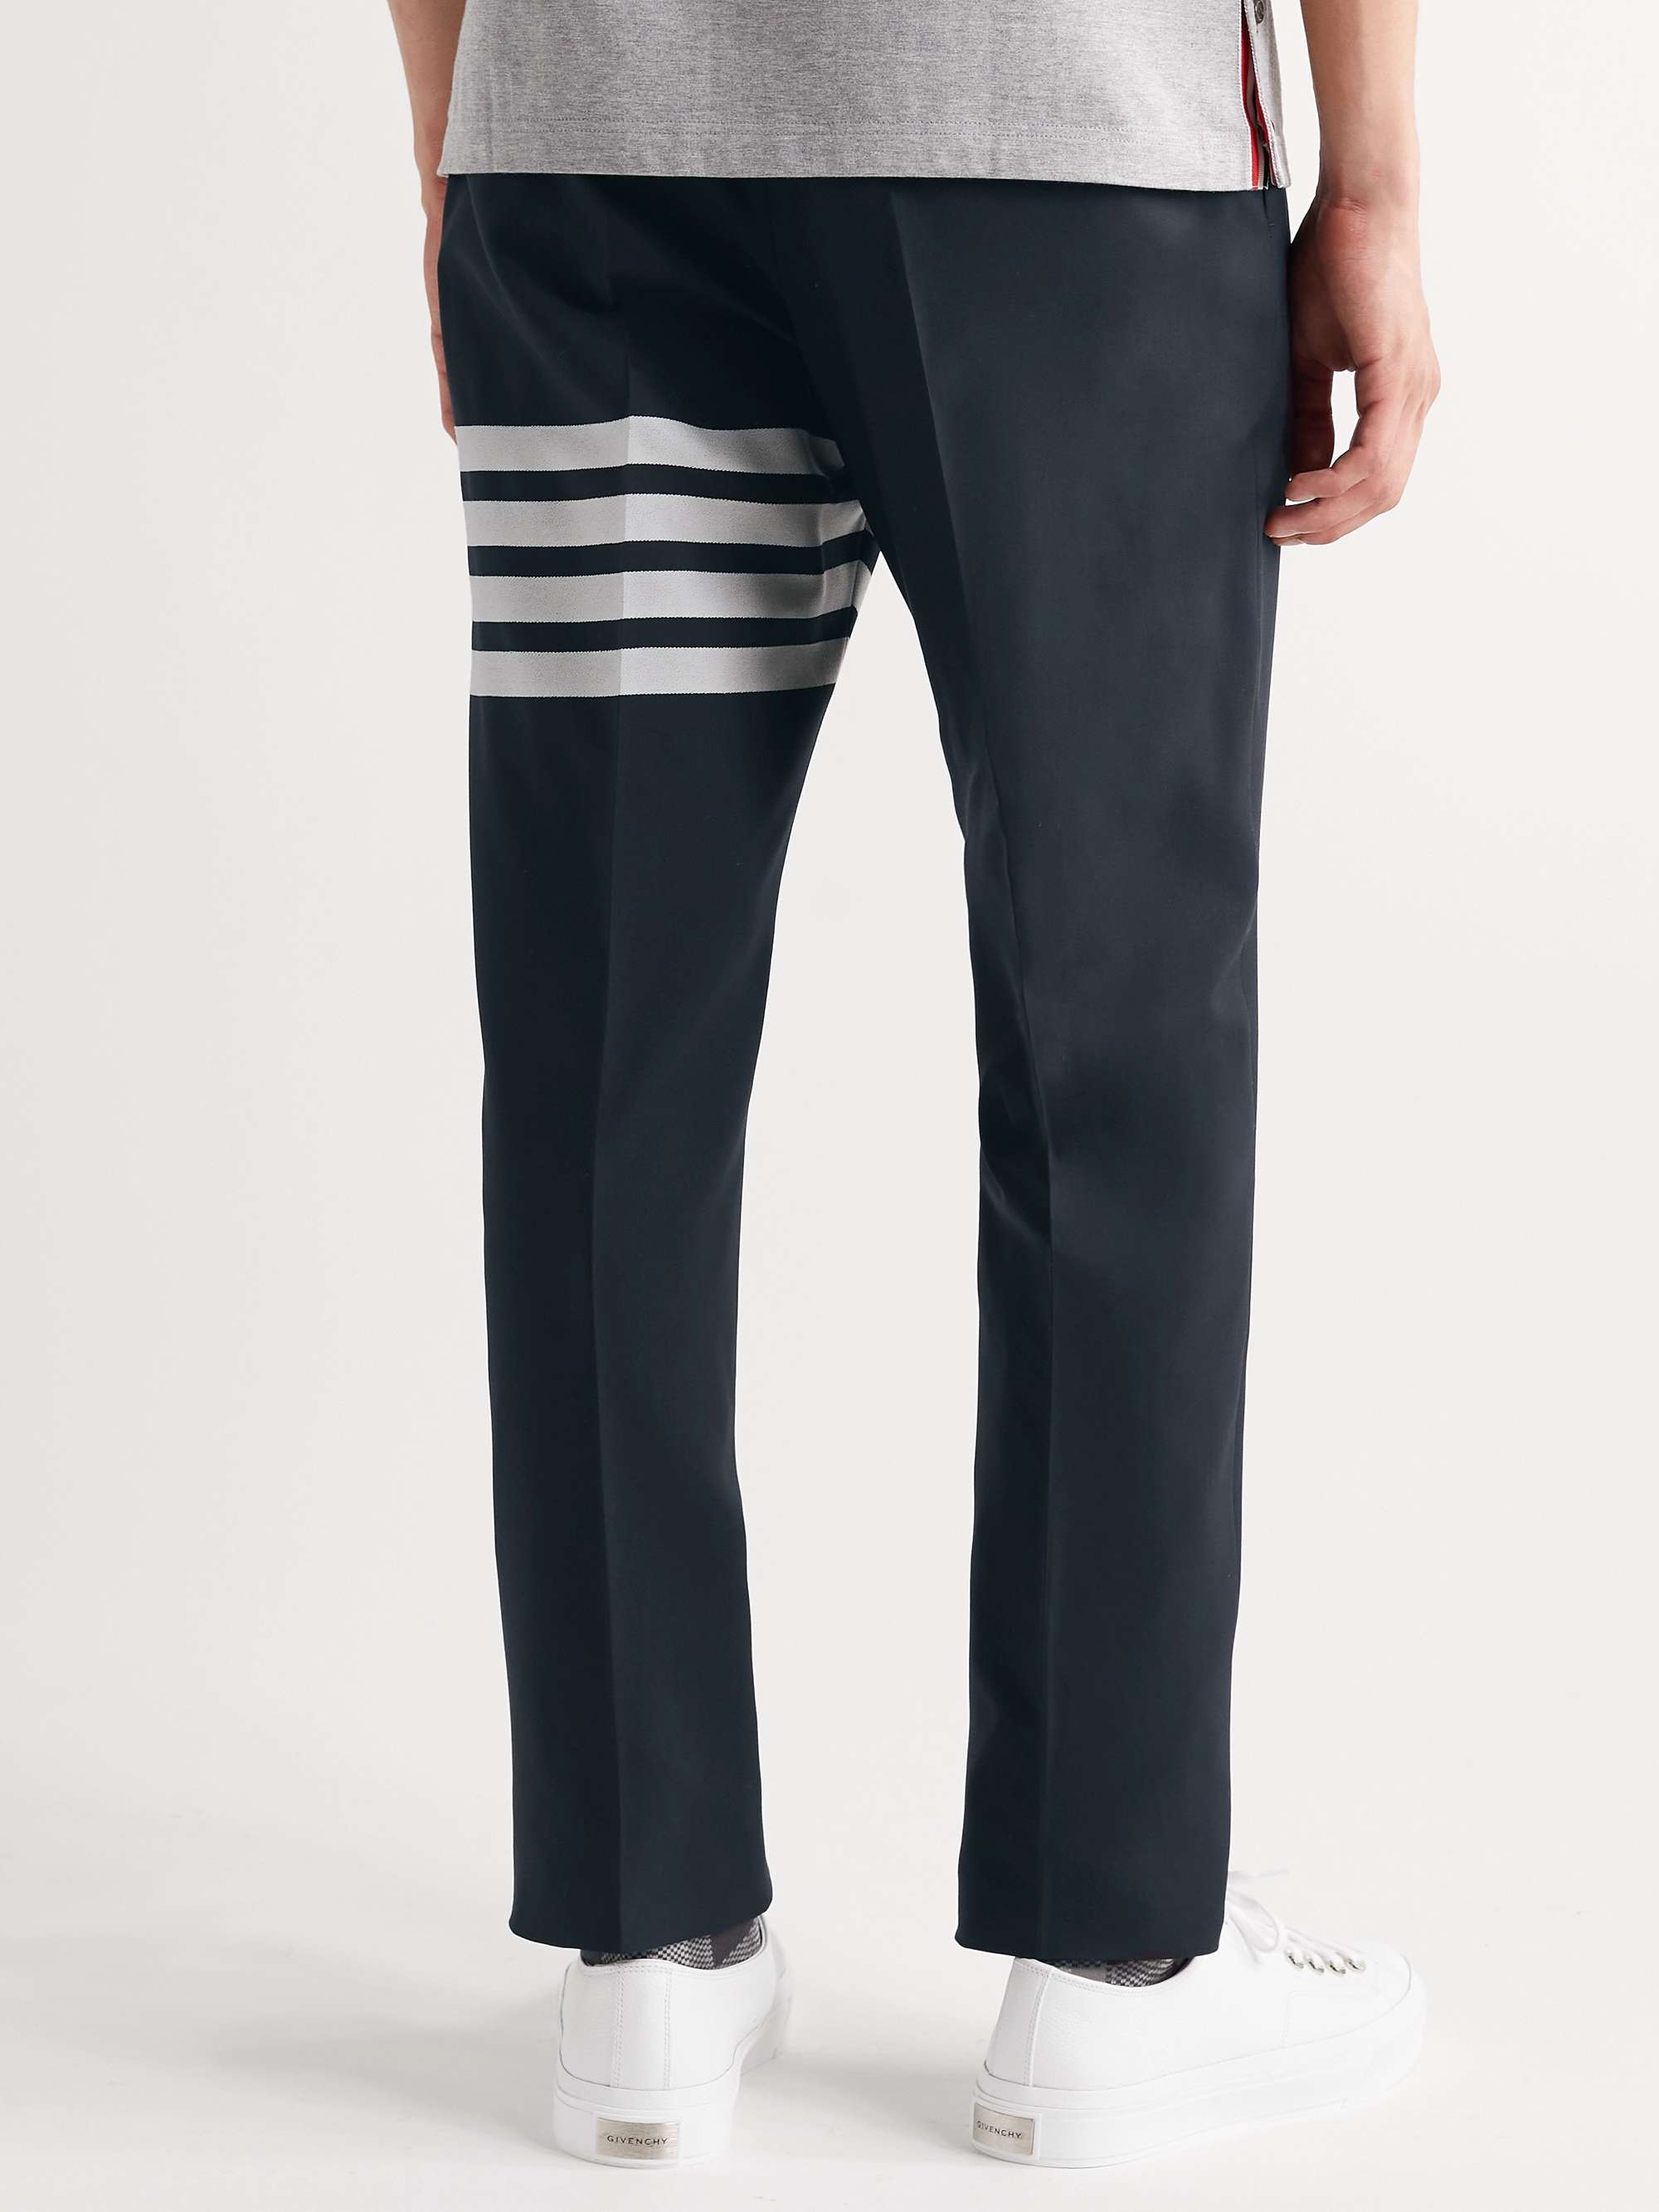 THOM BROWNE Slim-Fit Tapered Striped Wool Suit Trousers